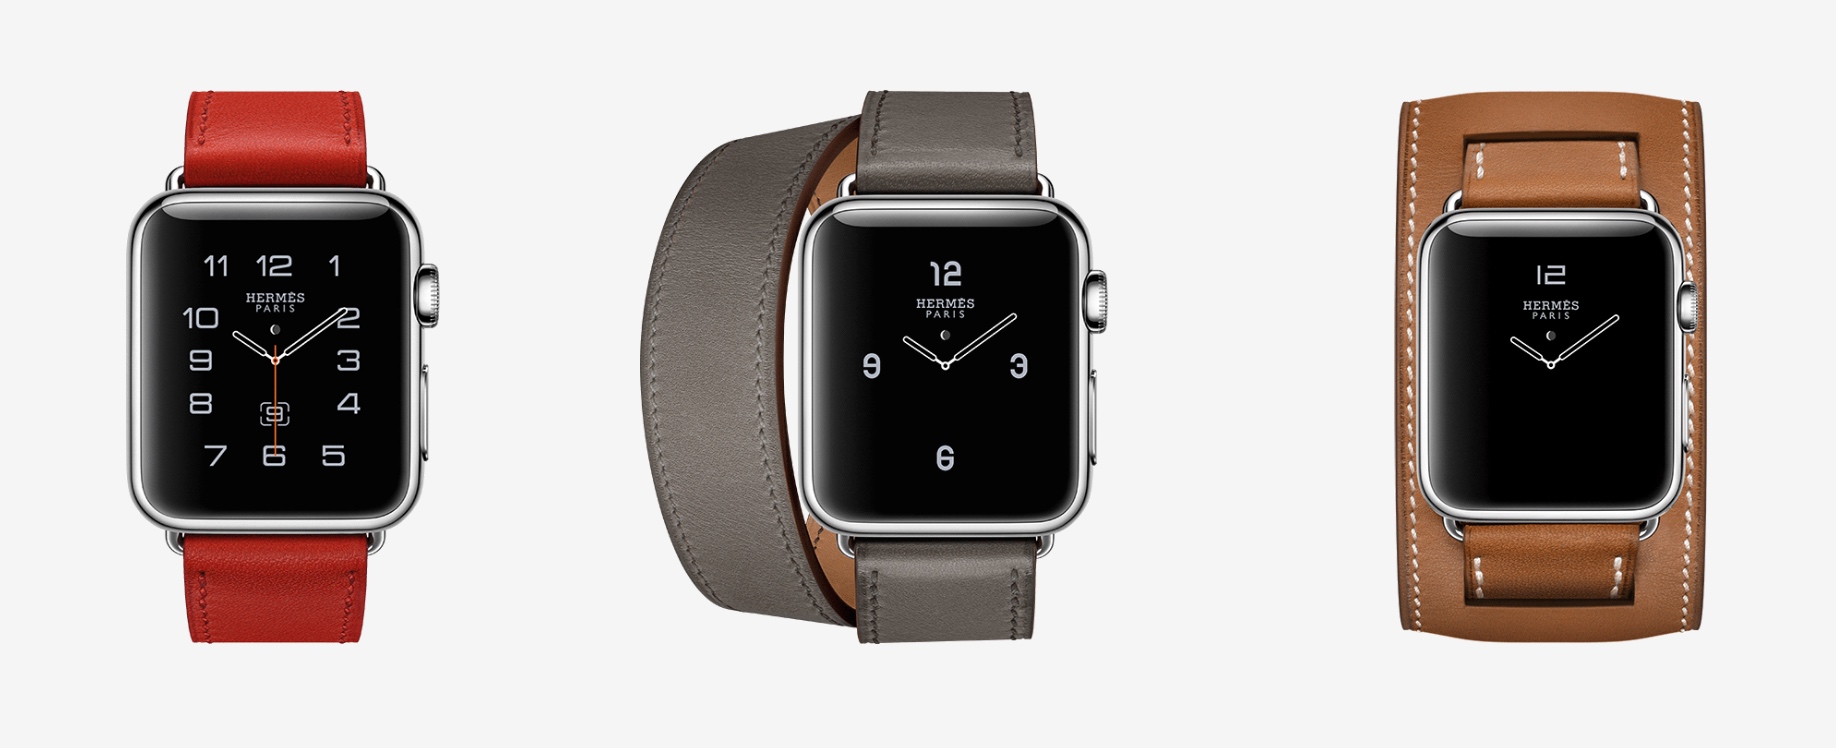 You Can Now Buy An Apple Watch Hermès Edition Online